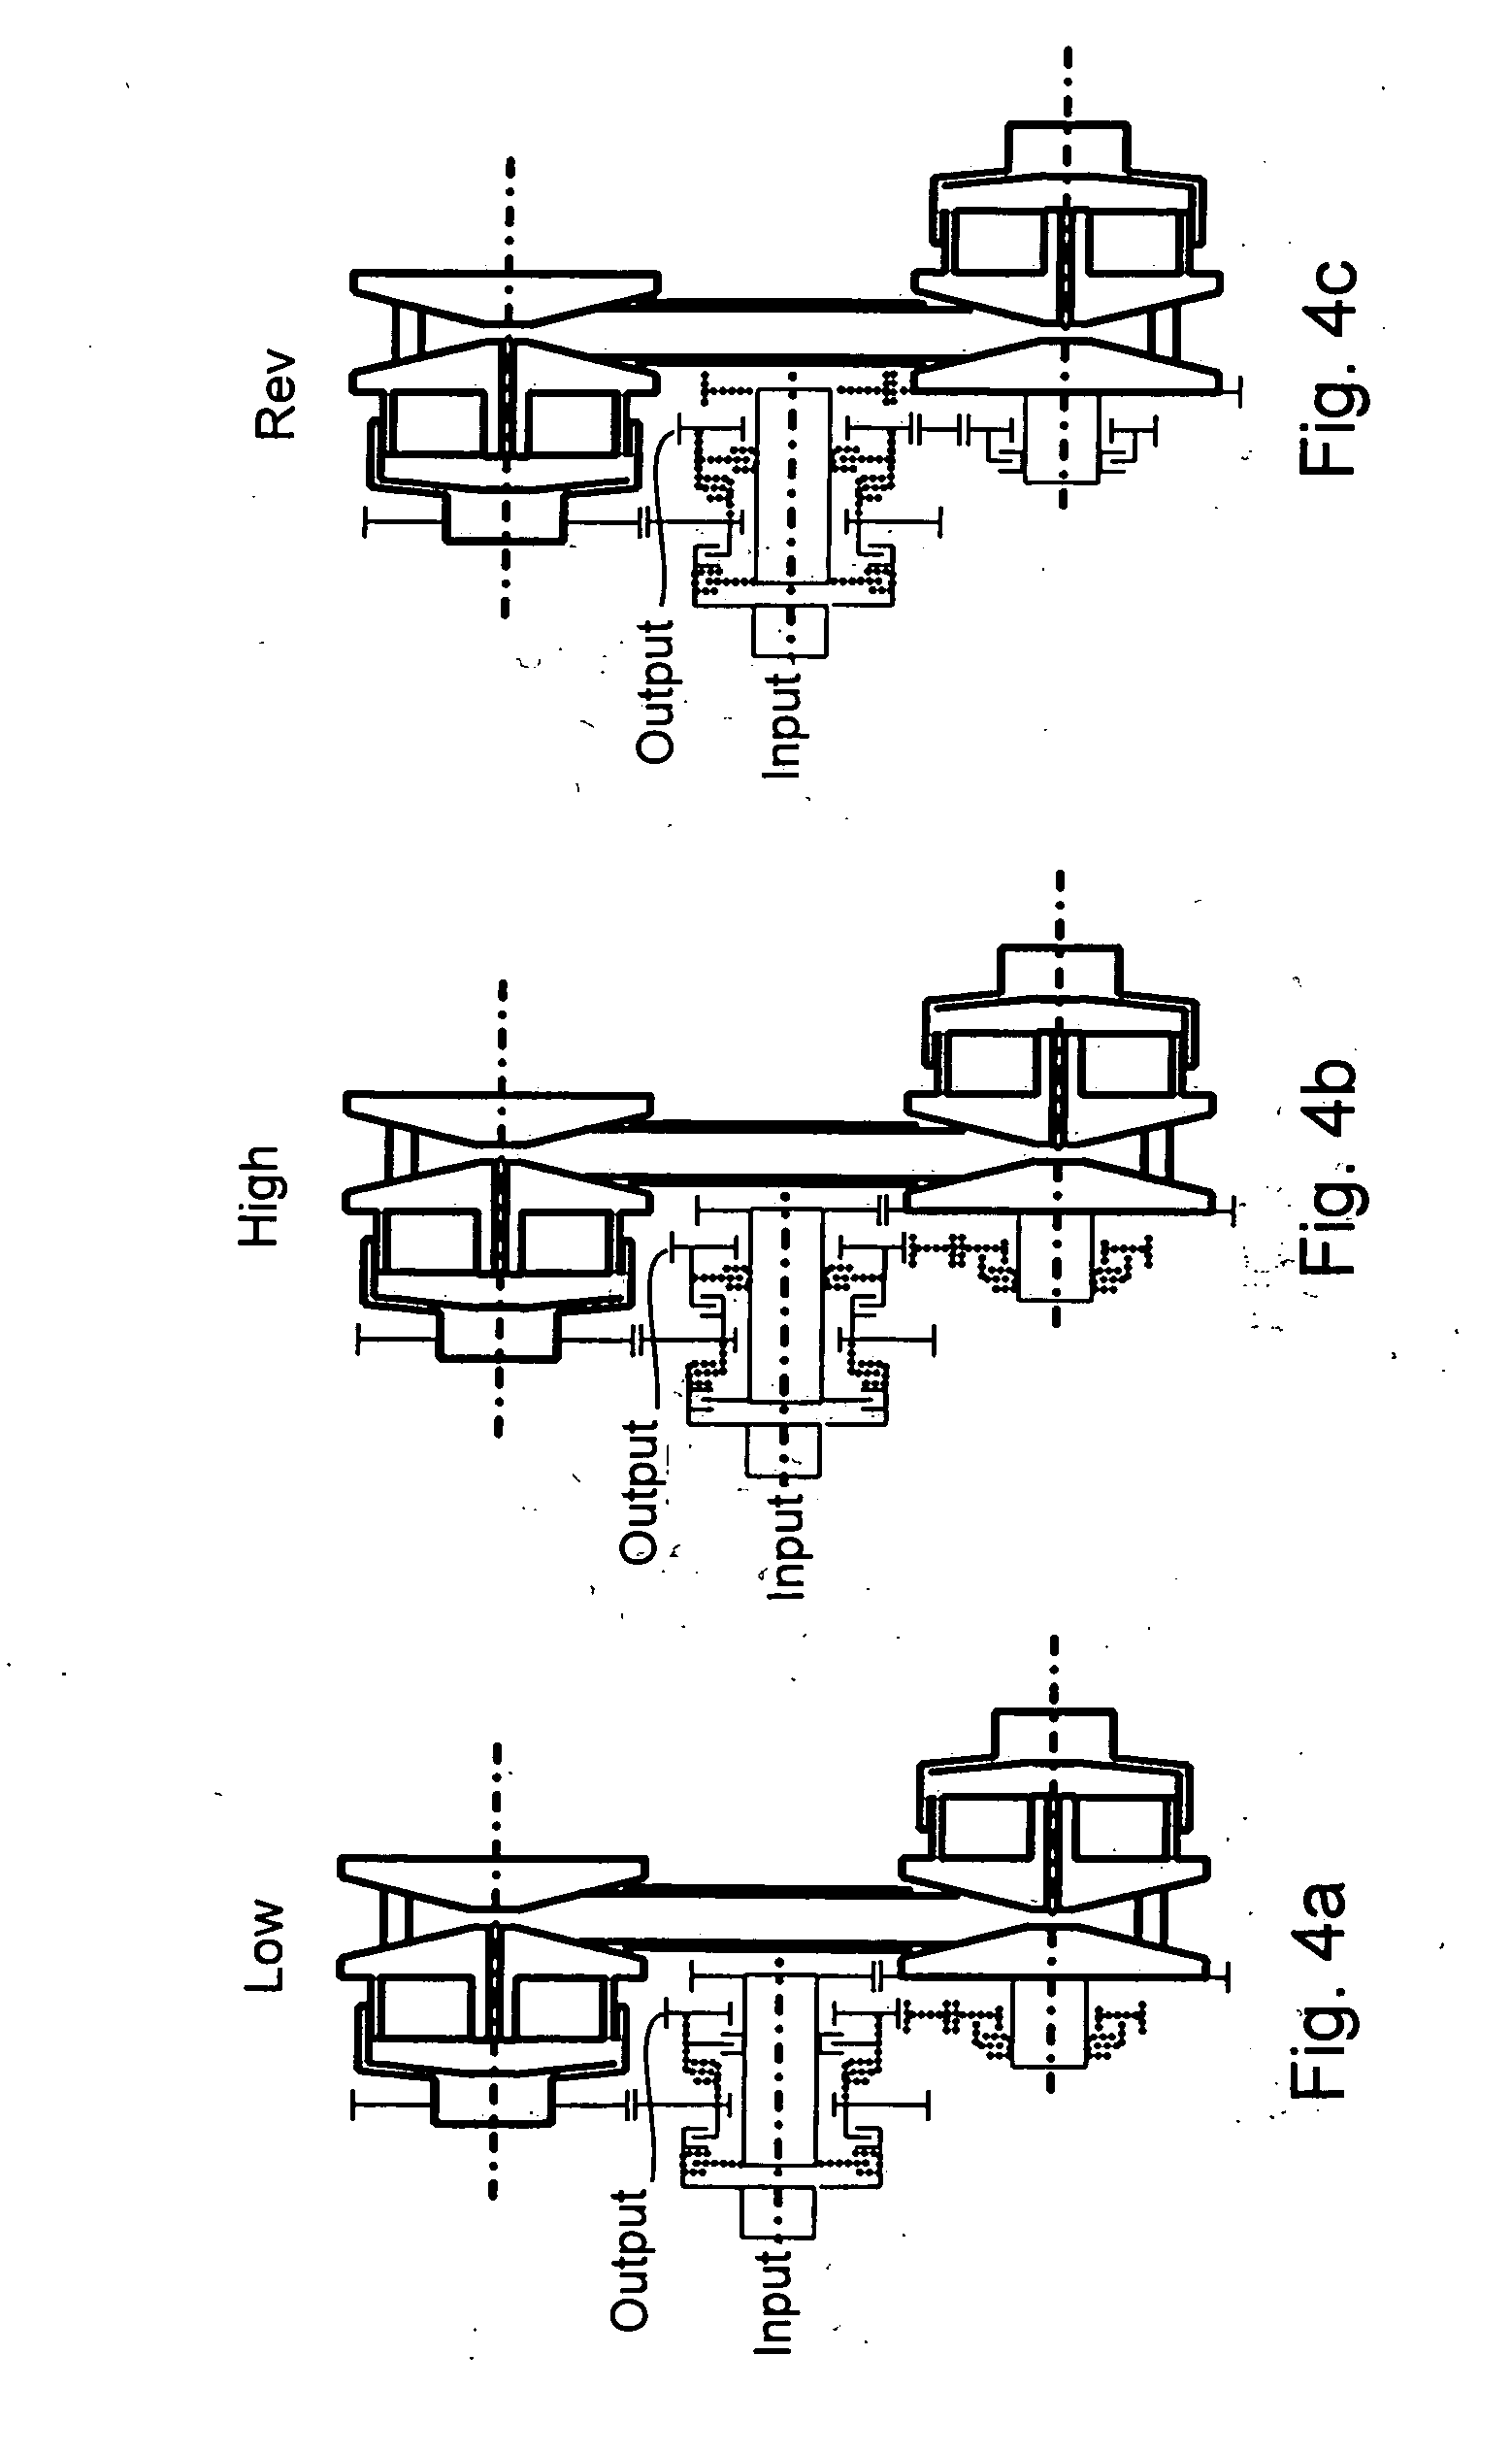 Vehicle transmission having continuously variable gear ratios